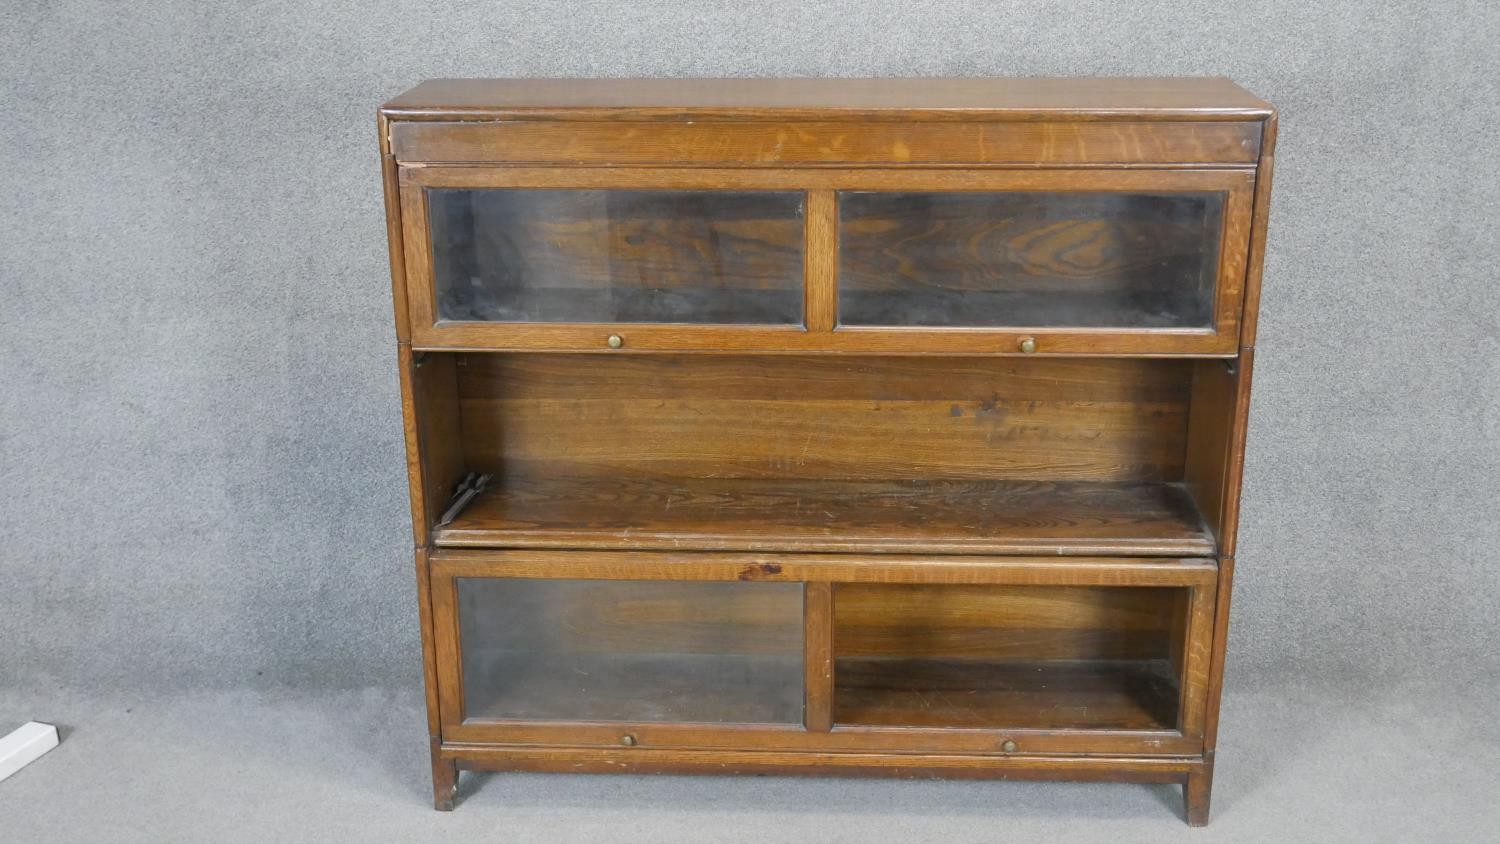 A mid century oak sectional bookcase with glazed sliding doors. Each part breaks down and is flat